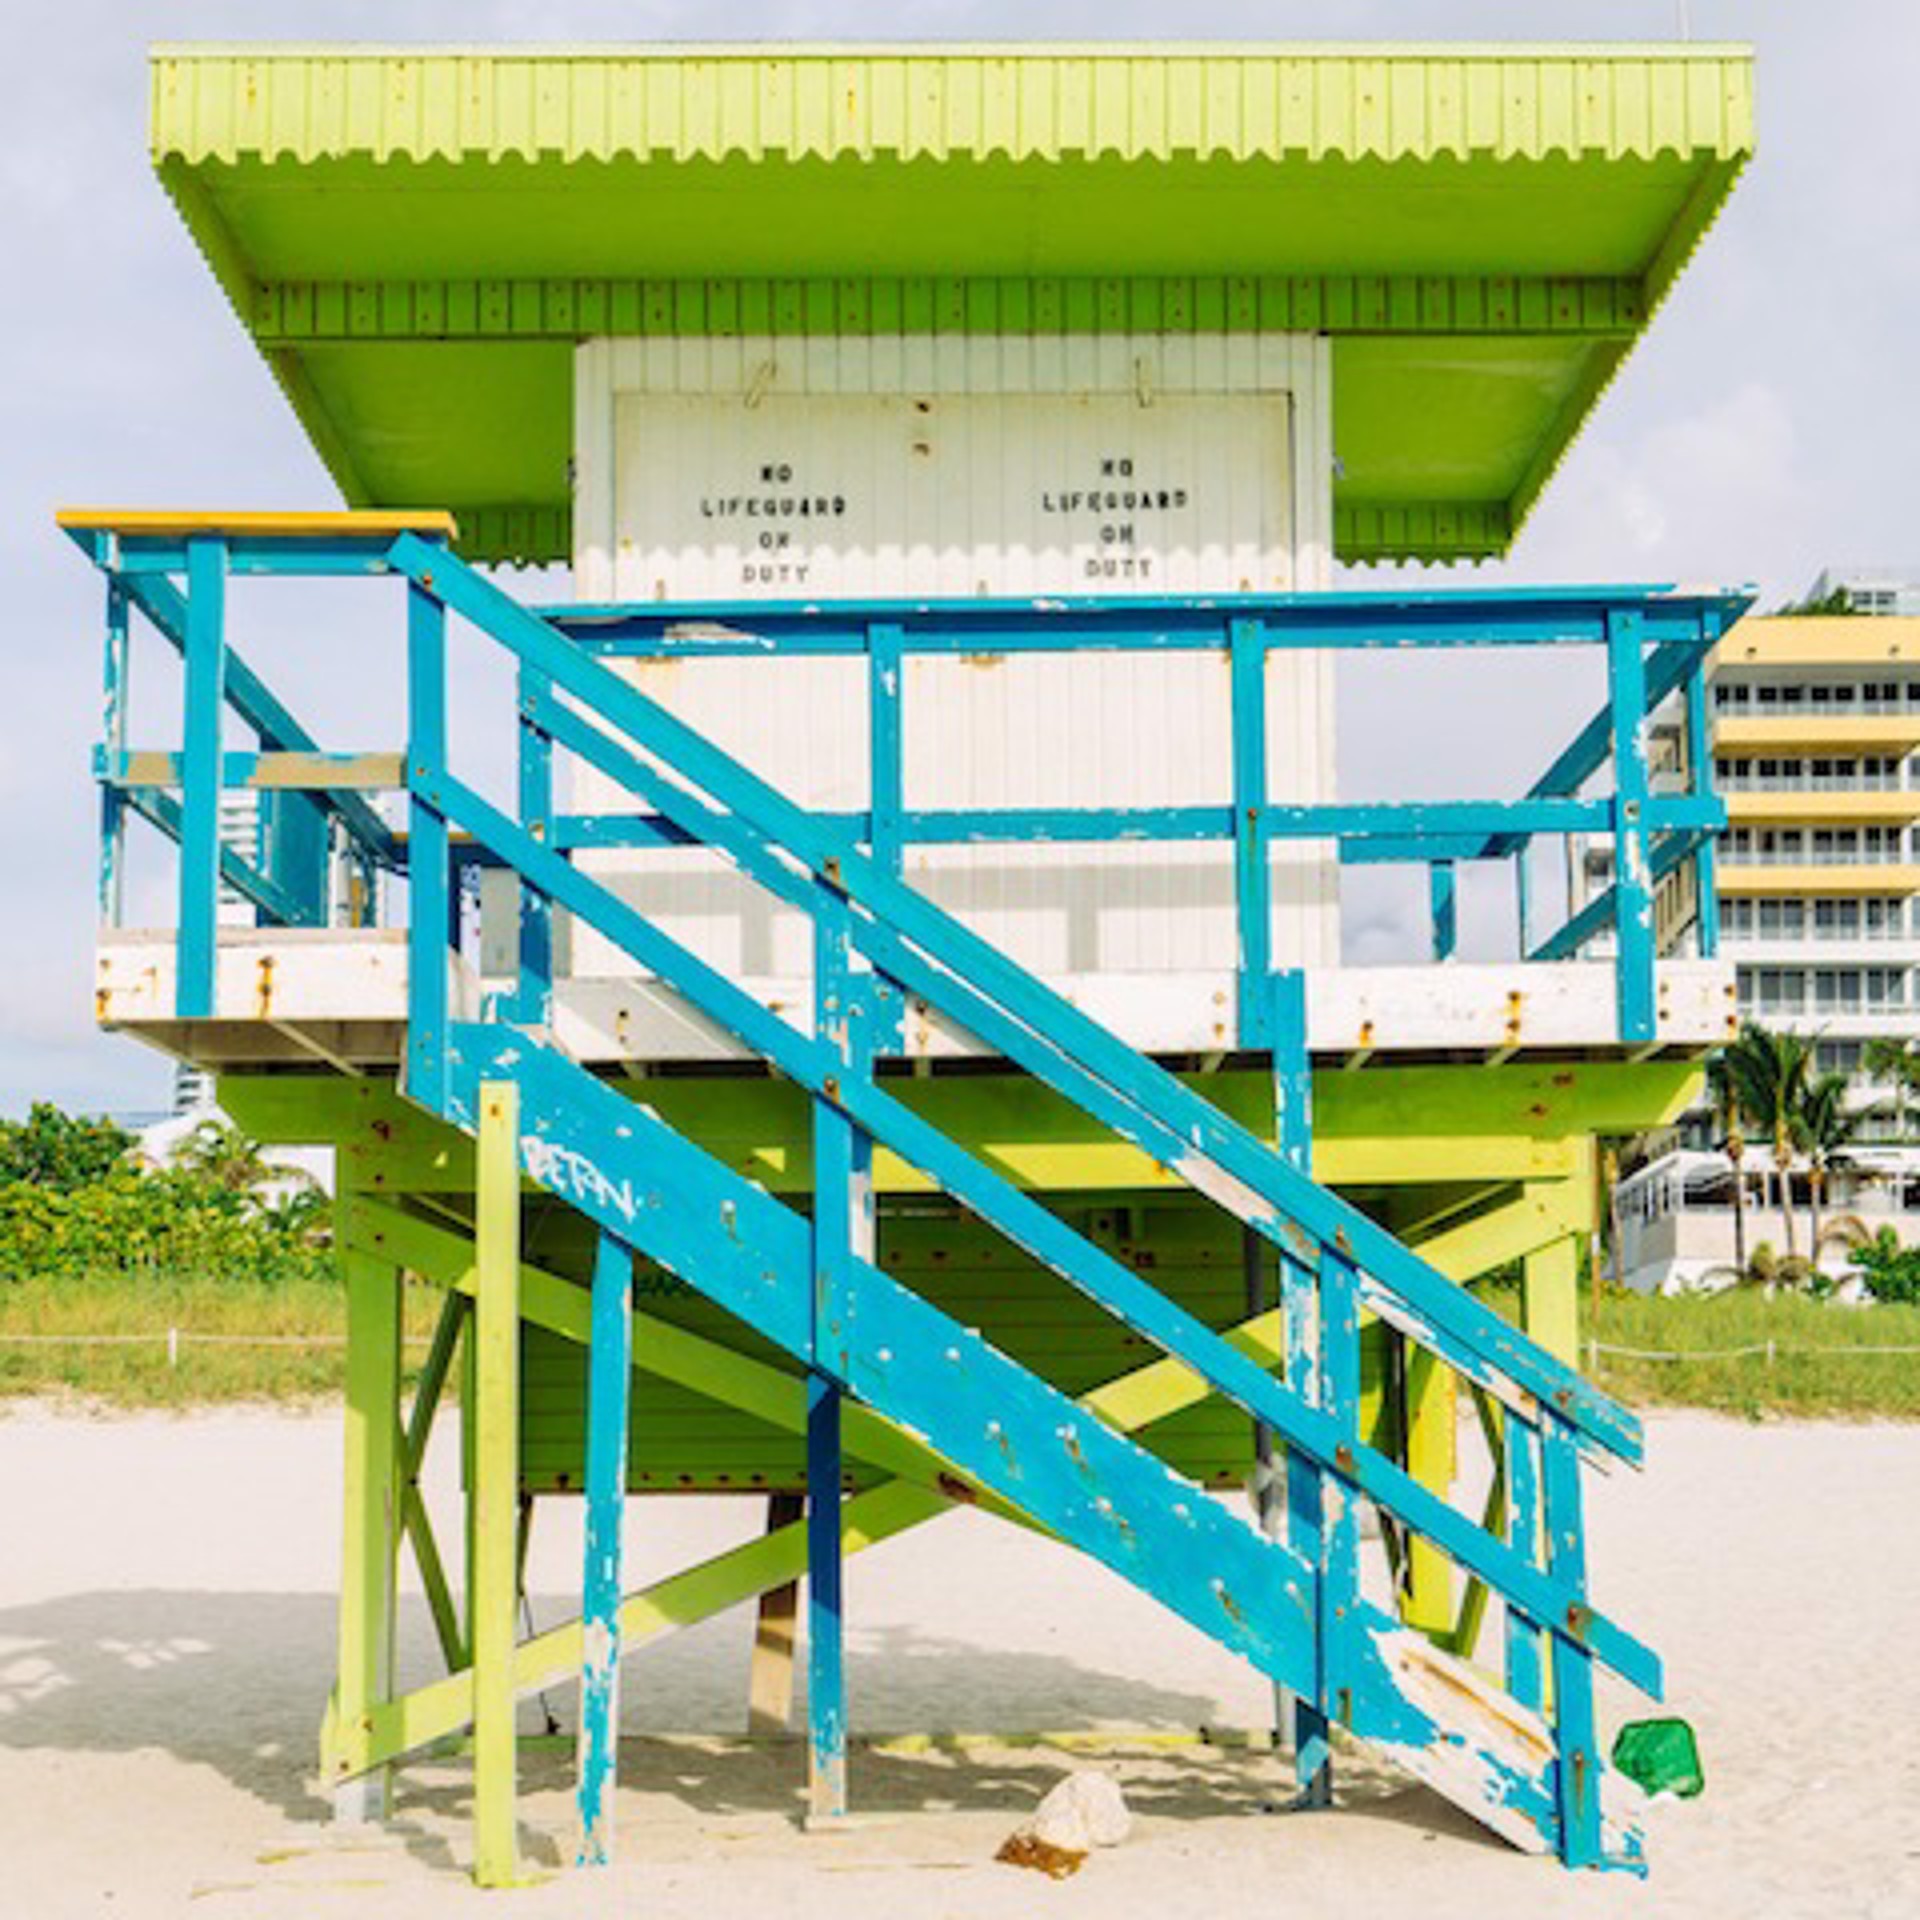 1st Street Lifeguard Stand-Front View by Peter Mendelson